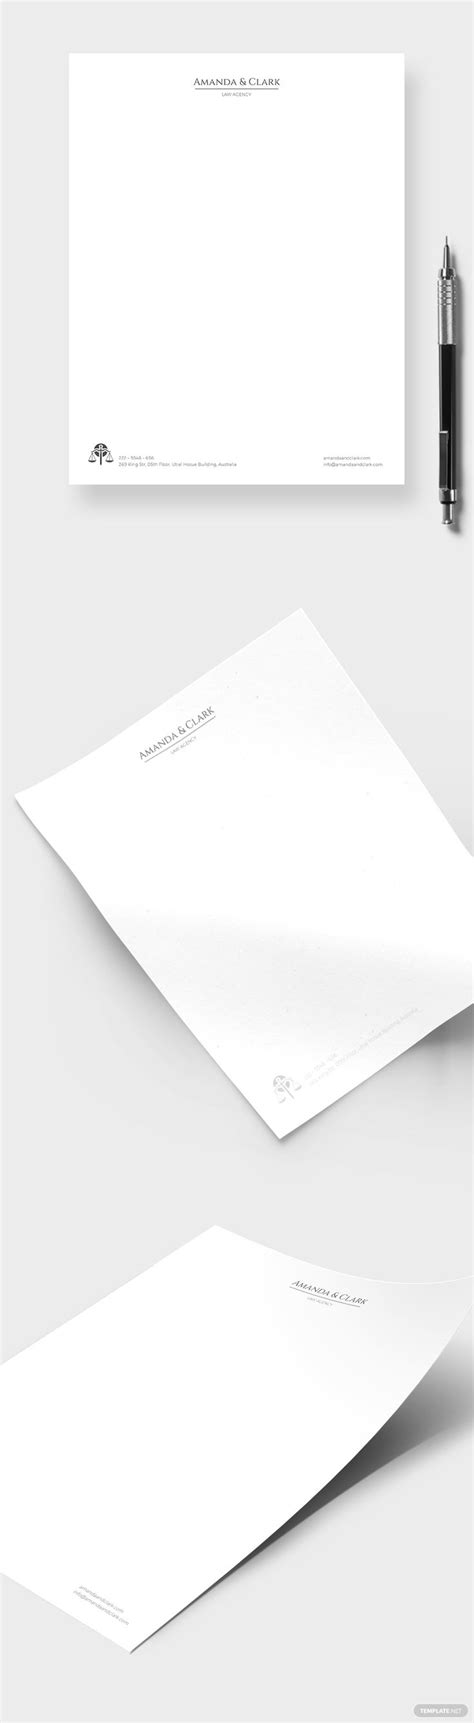 Legal letterhead templates for professional attorneys and law offices! Legal Letterhead in 2020 | Letterhead template word ...